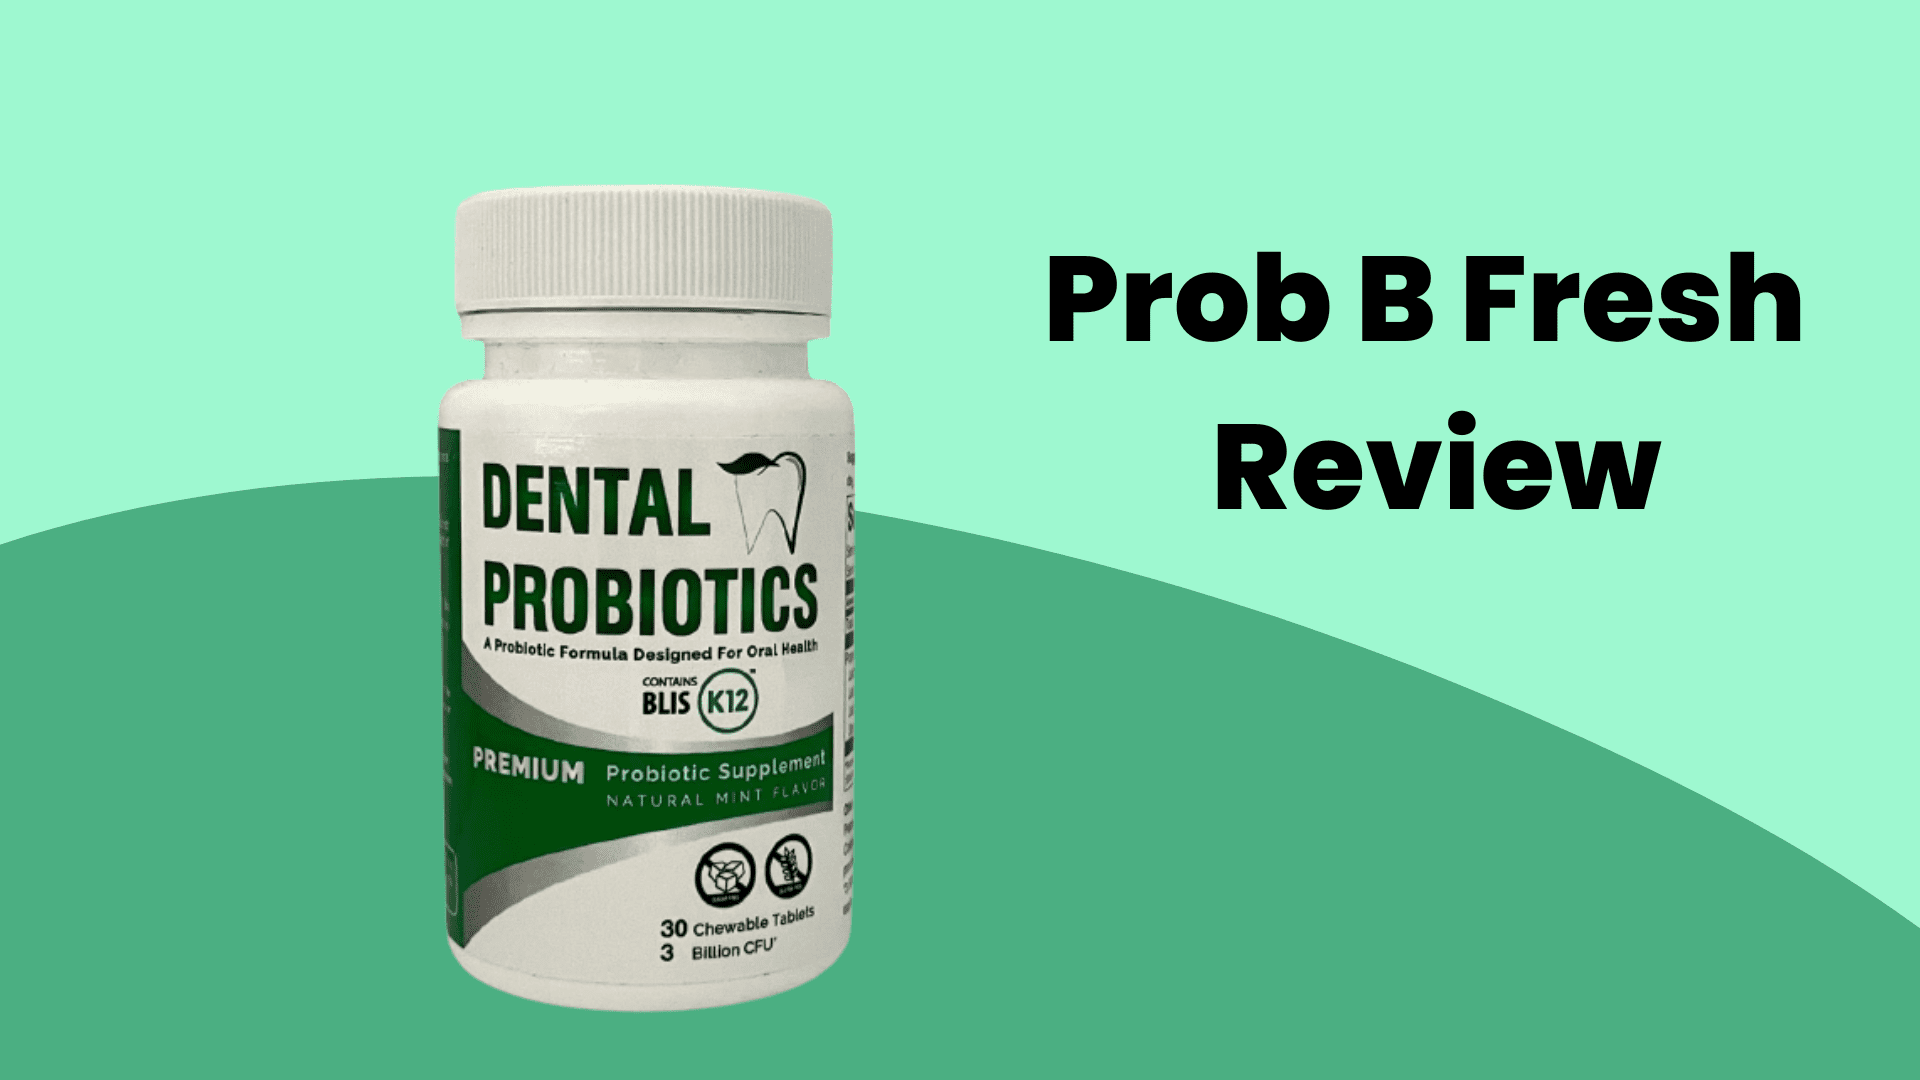 Pro B Fresh Review: Does It Relief Bad Breath?